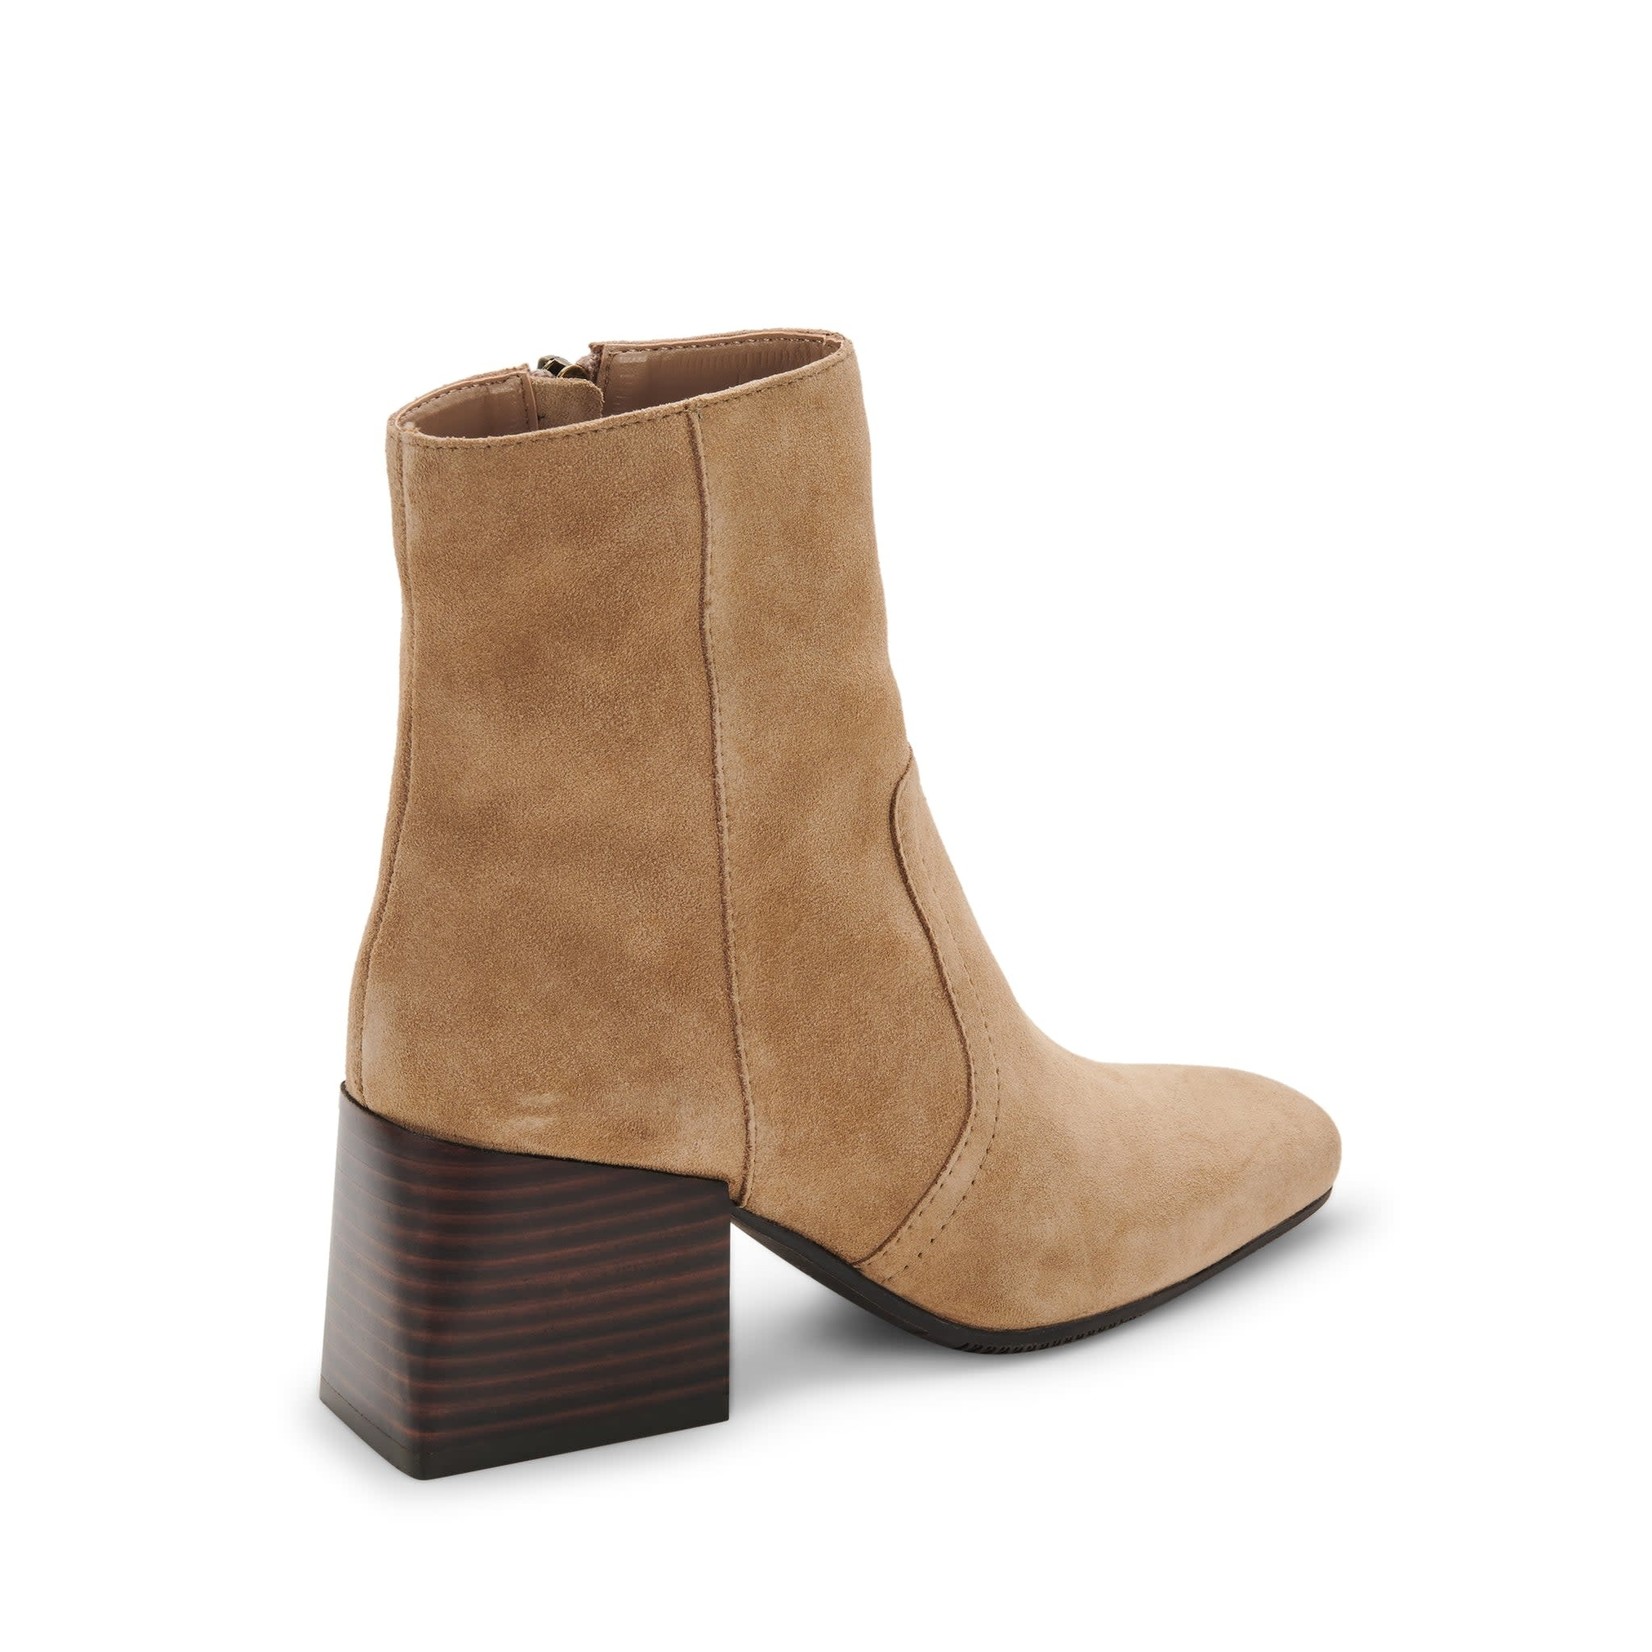 Blondo Salome Taupe Suede by Blondo